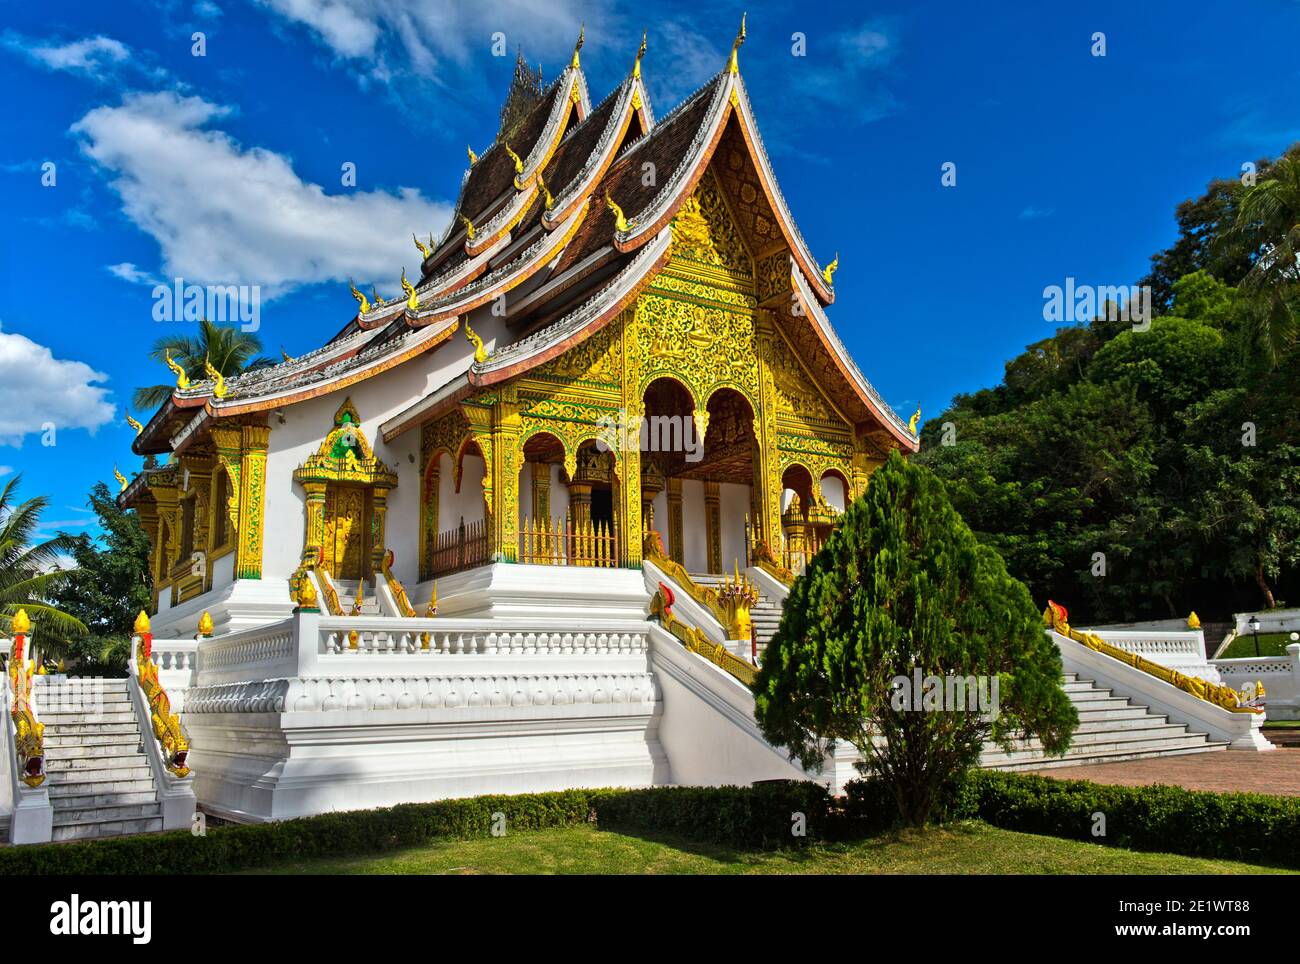 Haw Pha Bang temple with staggered roof with Naga finials on the ground of the former Royal Palace, Luang Prabang, Laos Stock Photo